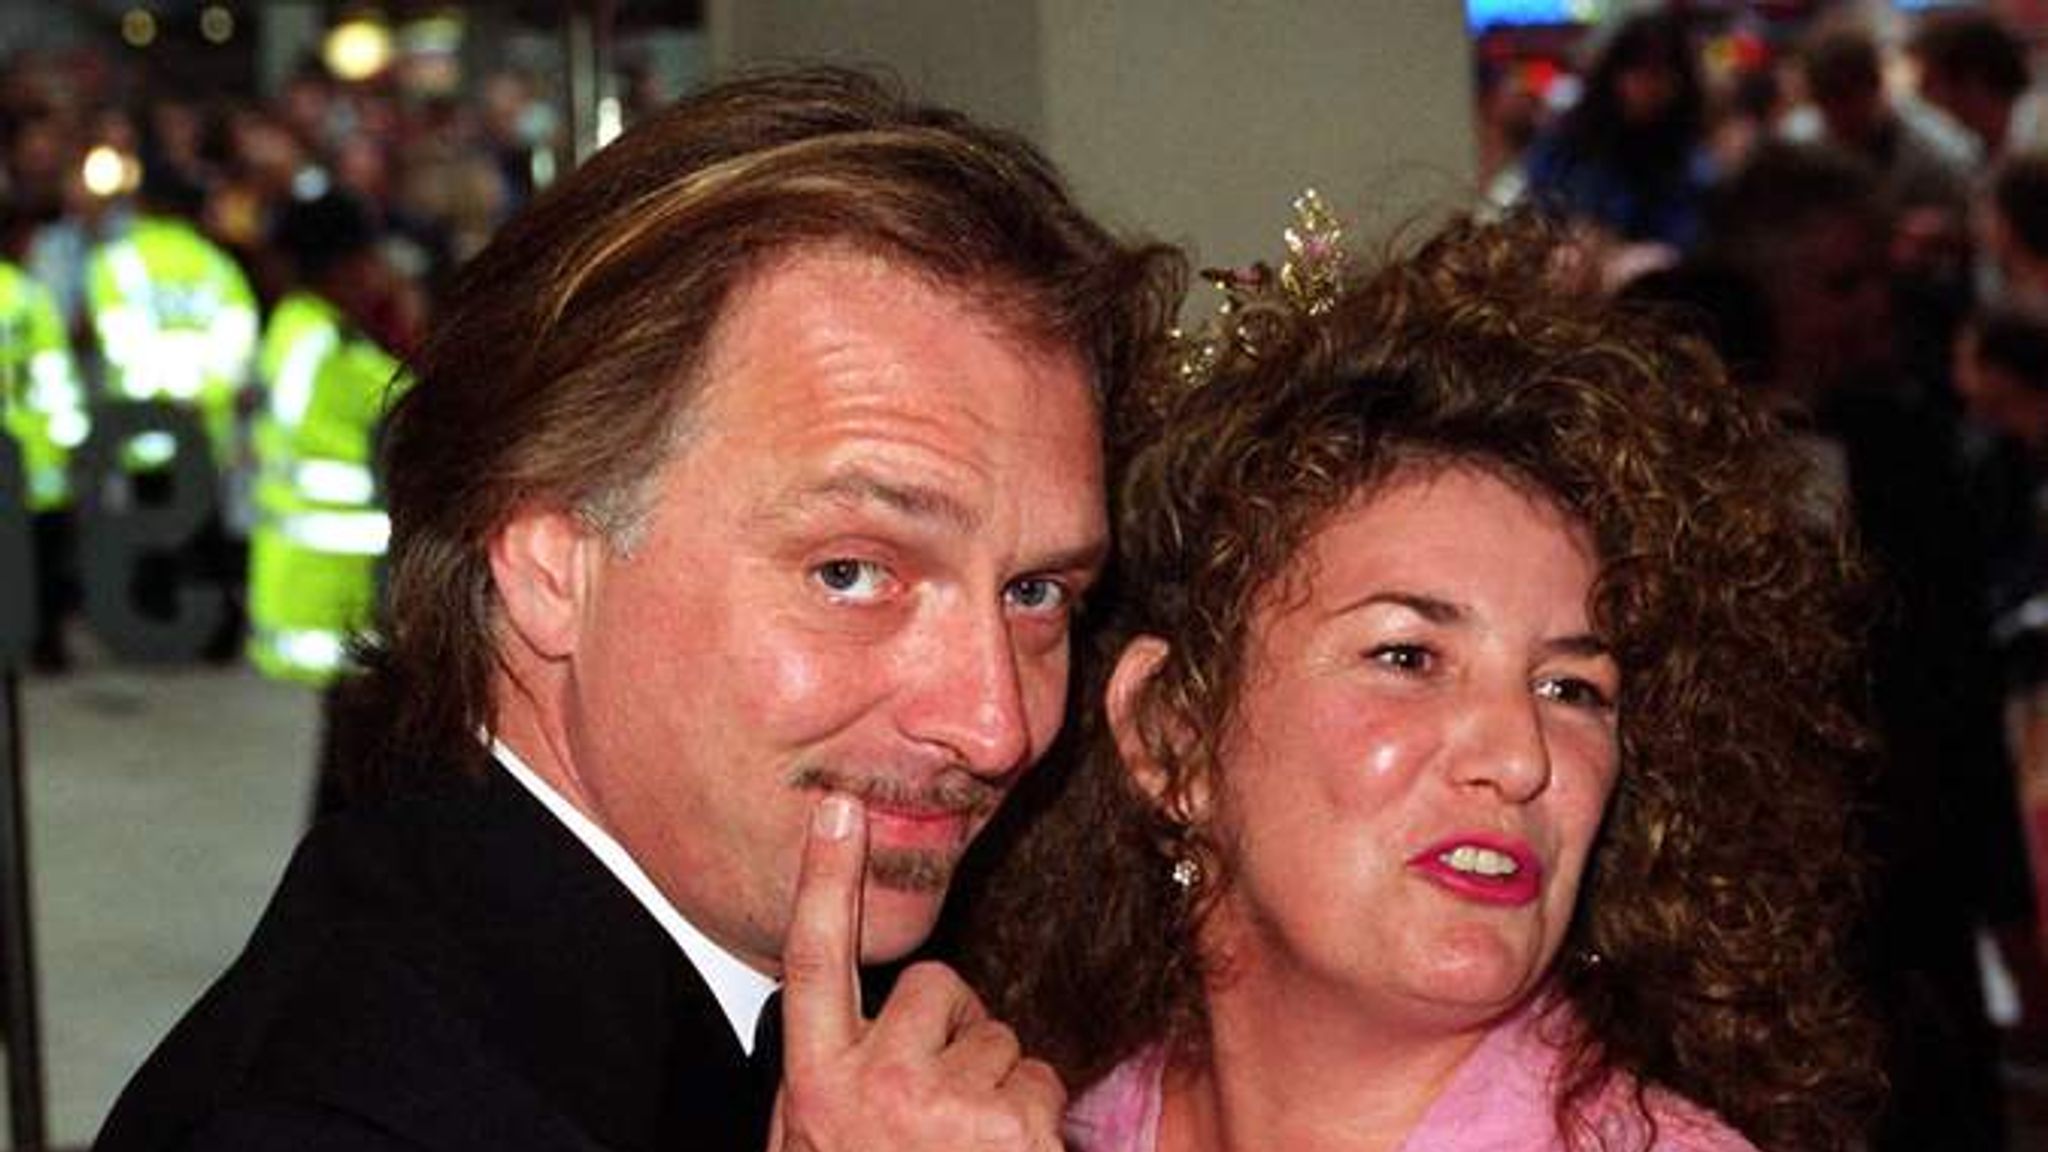 Rik Mayall: Comedian 'May Have Died After Fit' | Ents & Arts News | Sky News